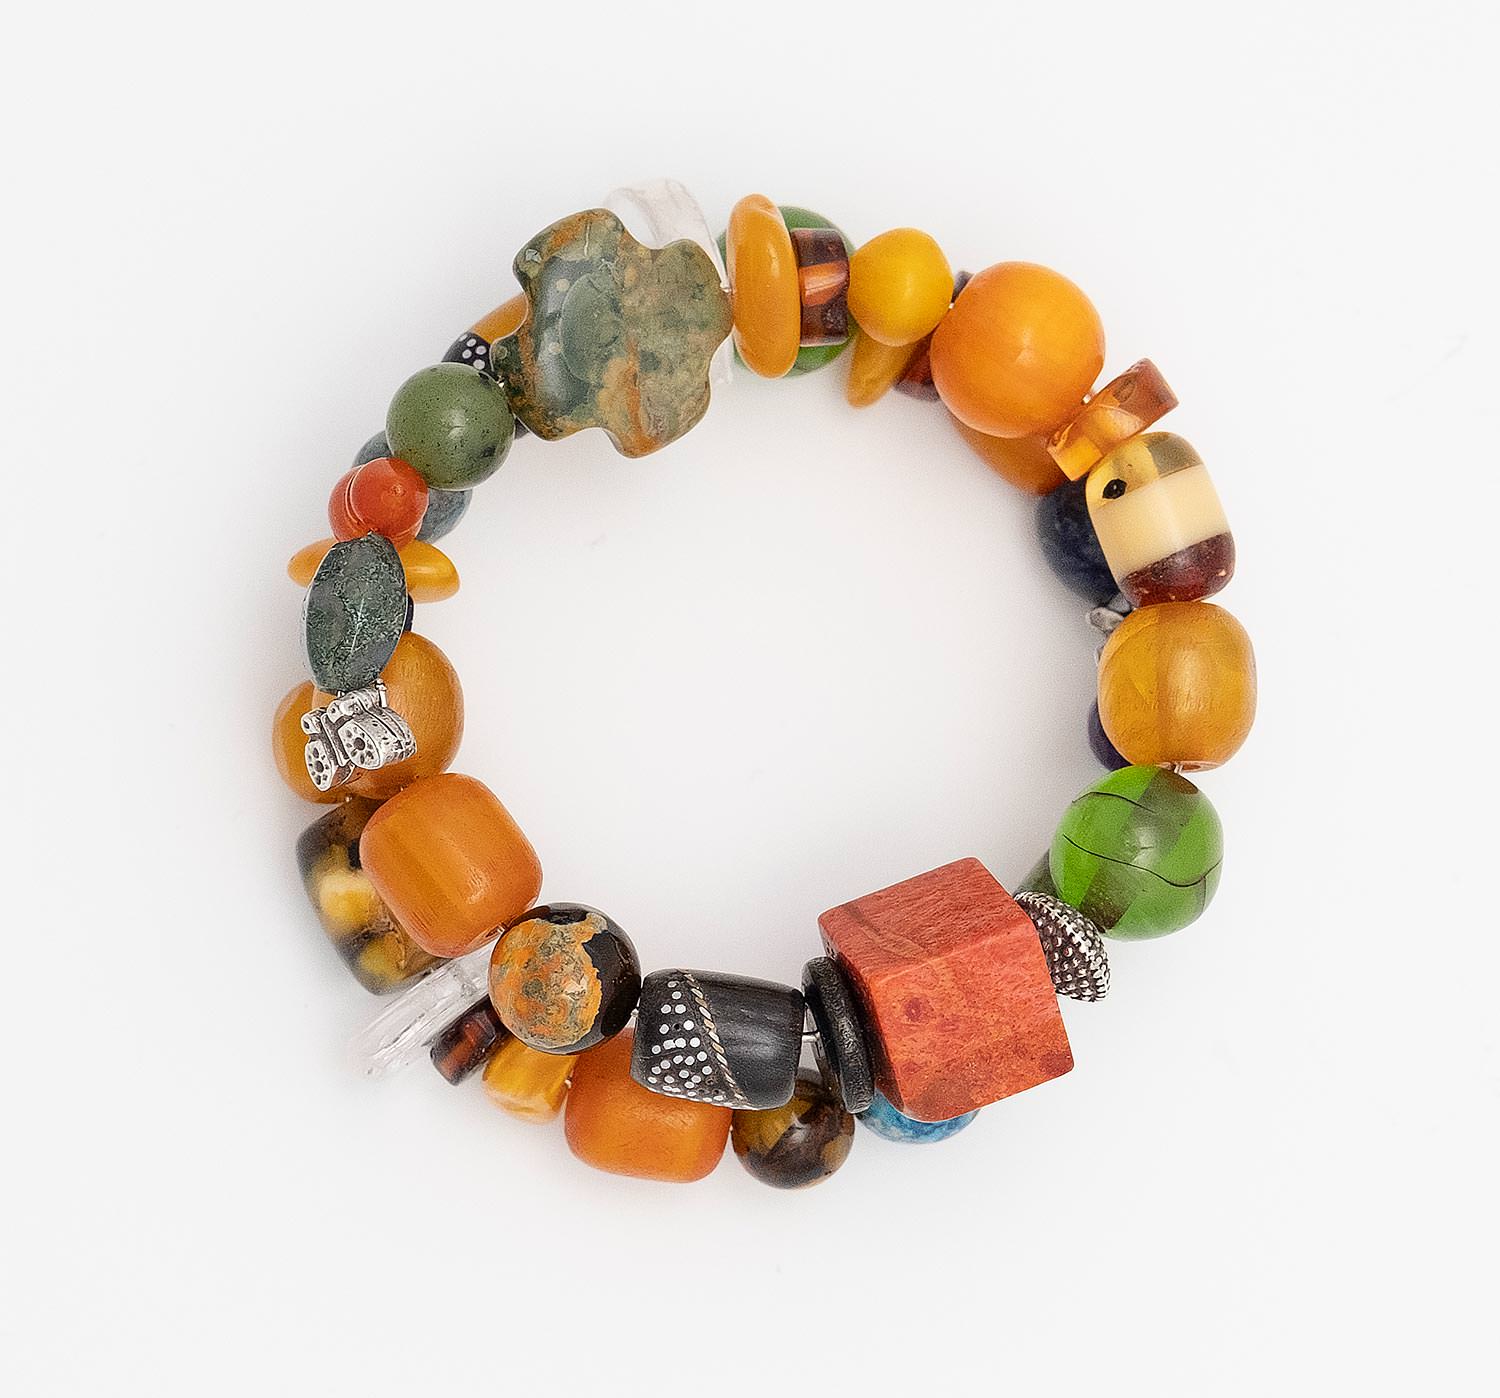 Bracelet with beads made of old mixture of artificial resins of Egypt (1960), Baltic Sea Amber (cut by hand and Ambroid), Ebony with inlaid silver and artificial resin,Water buffalo Horn with inlaid silver and bronze, Agates and tin

